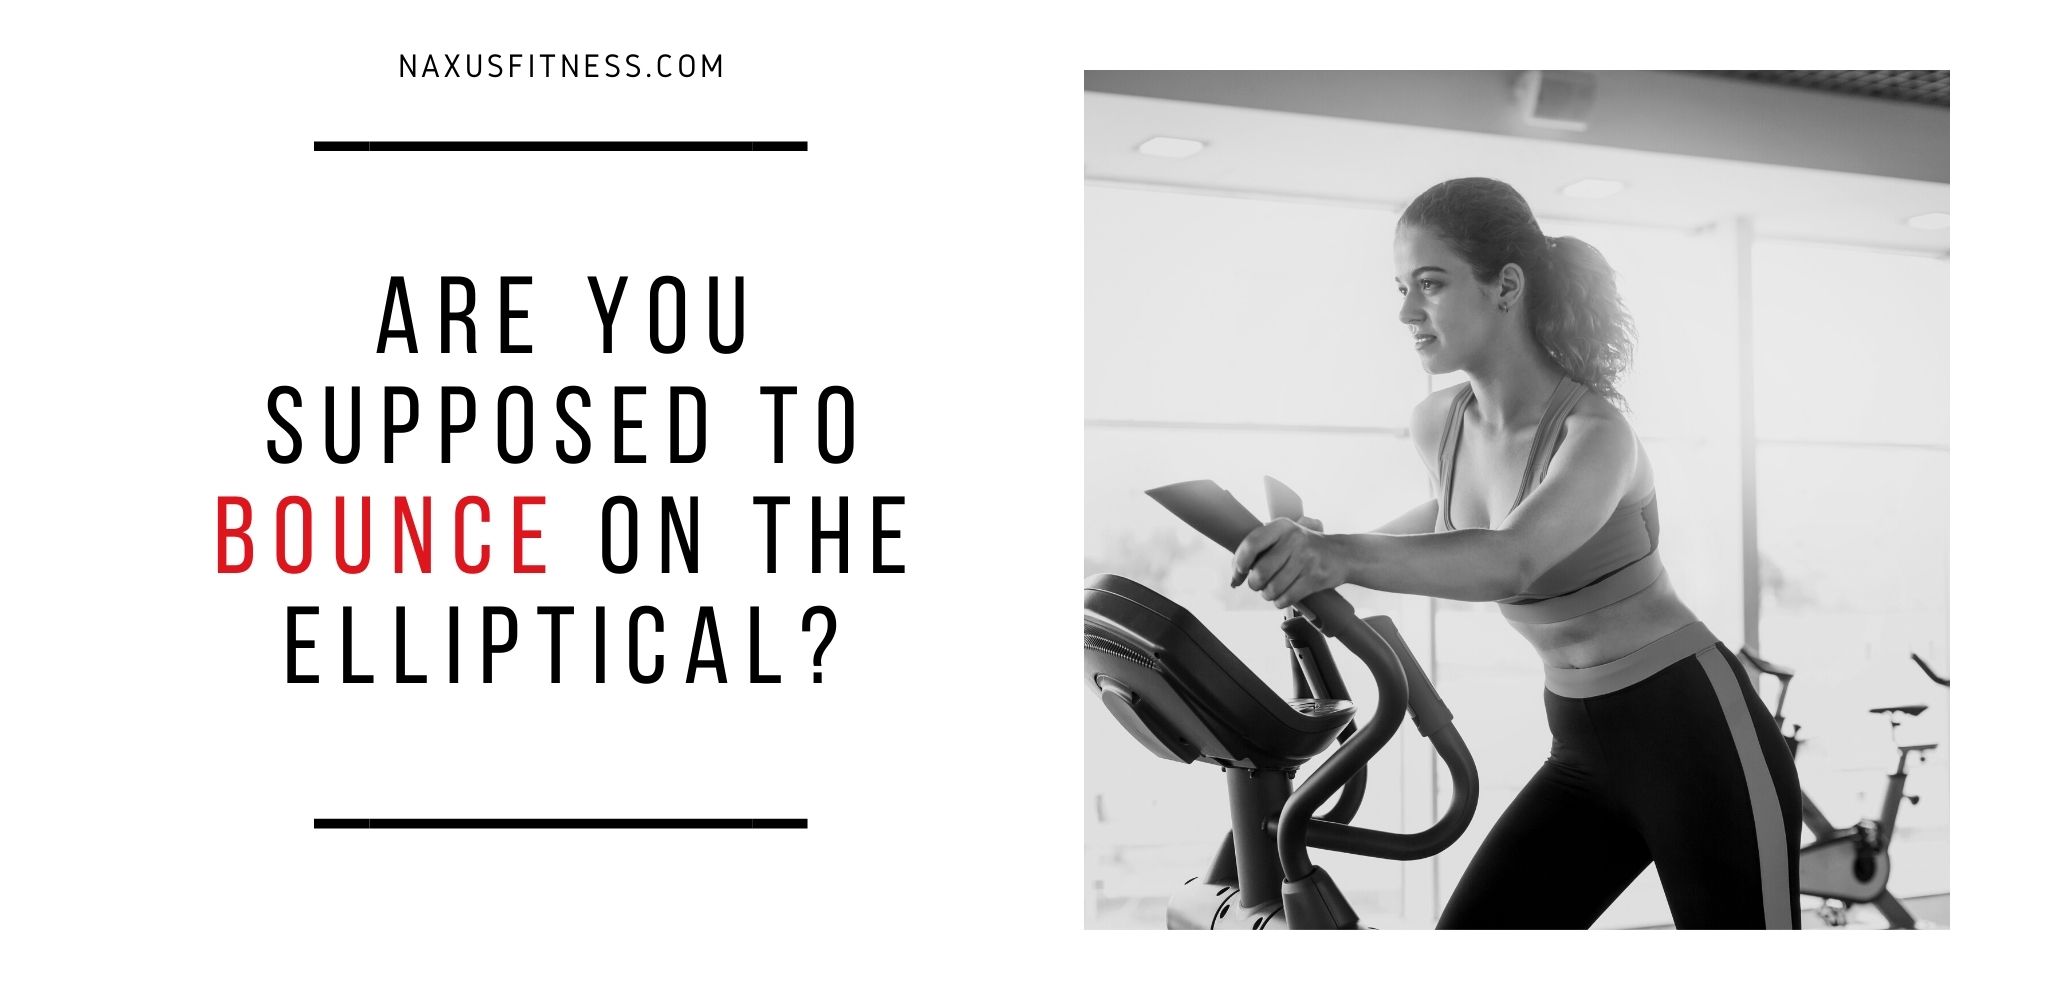 Are you supposed to bounce on the elliptical?